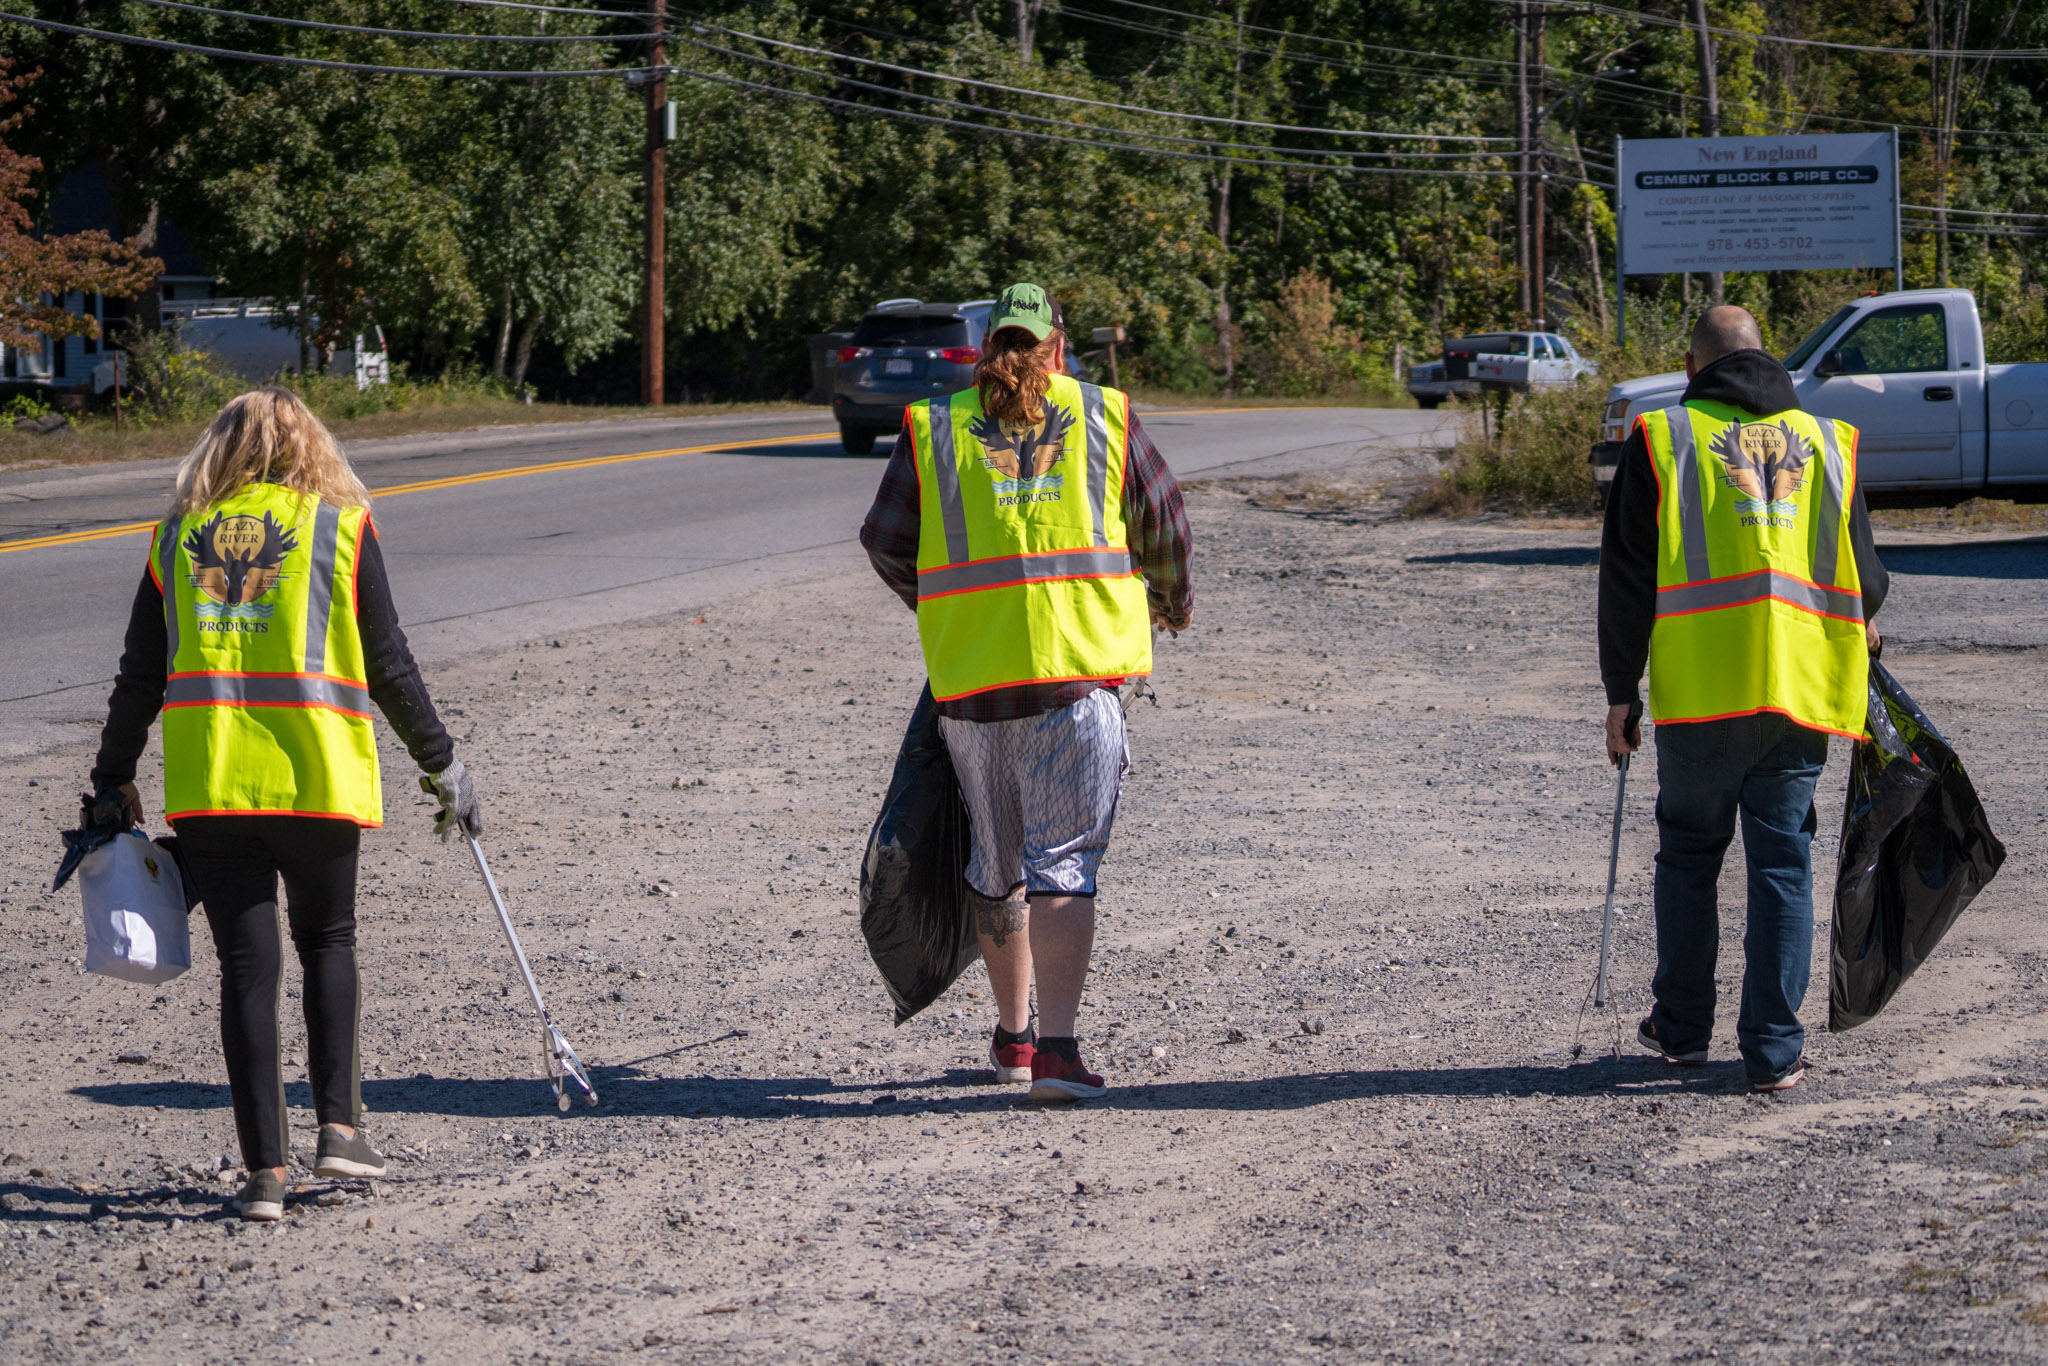 lazy river products annual broadway road cleanup dracut mass